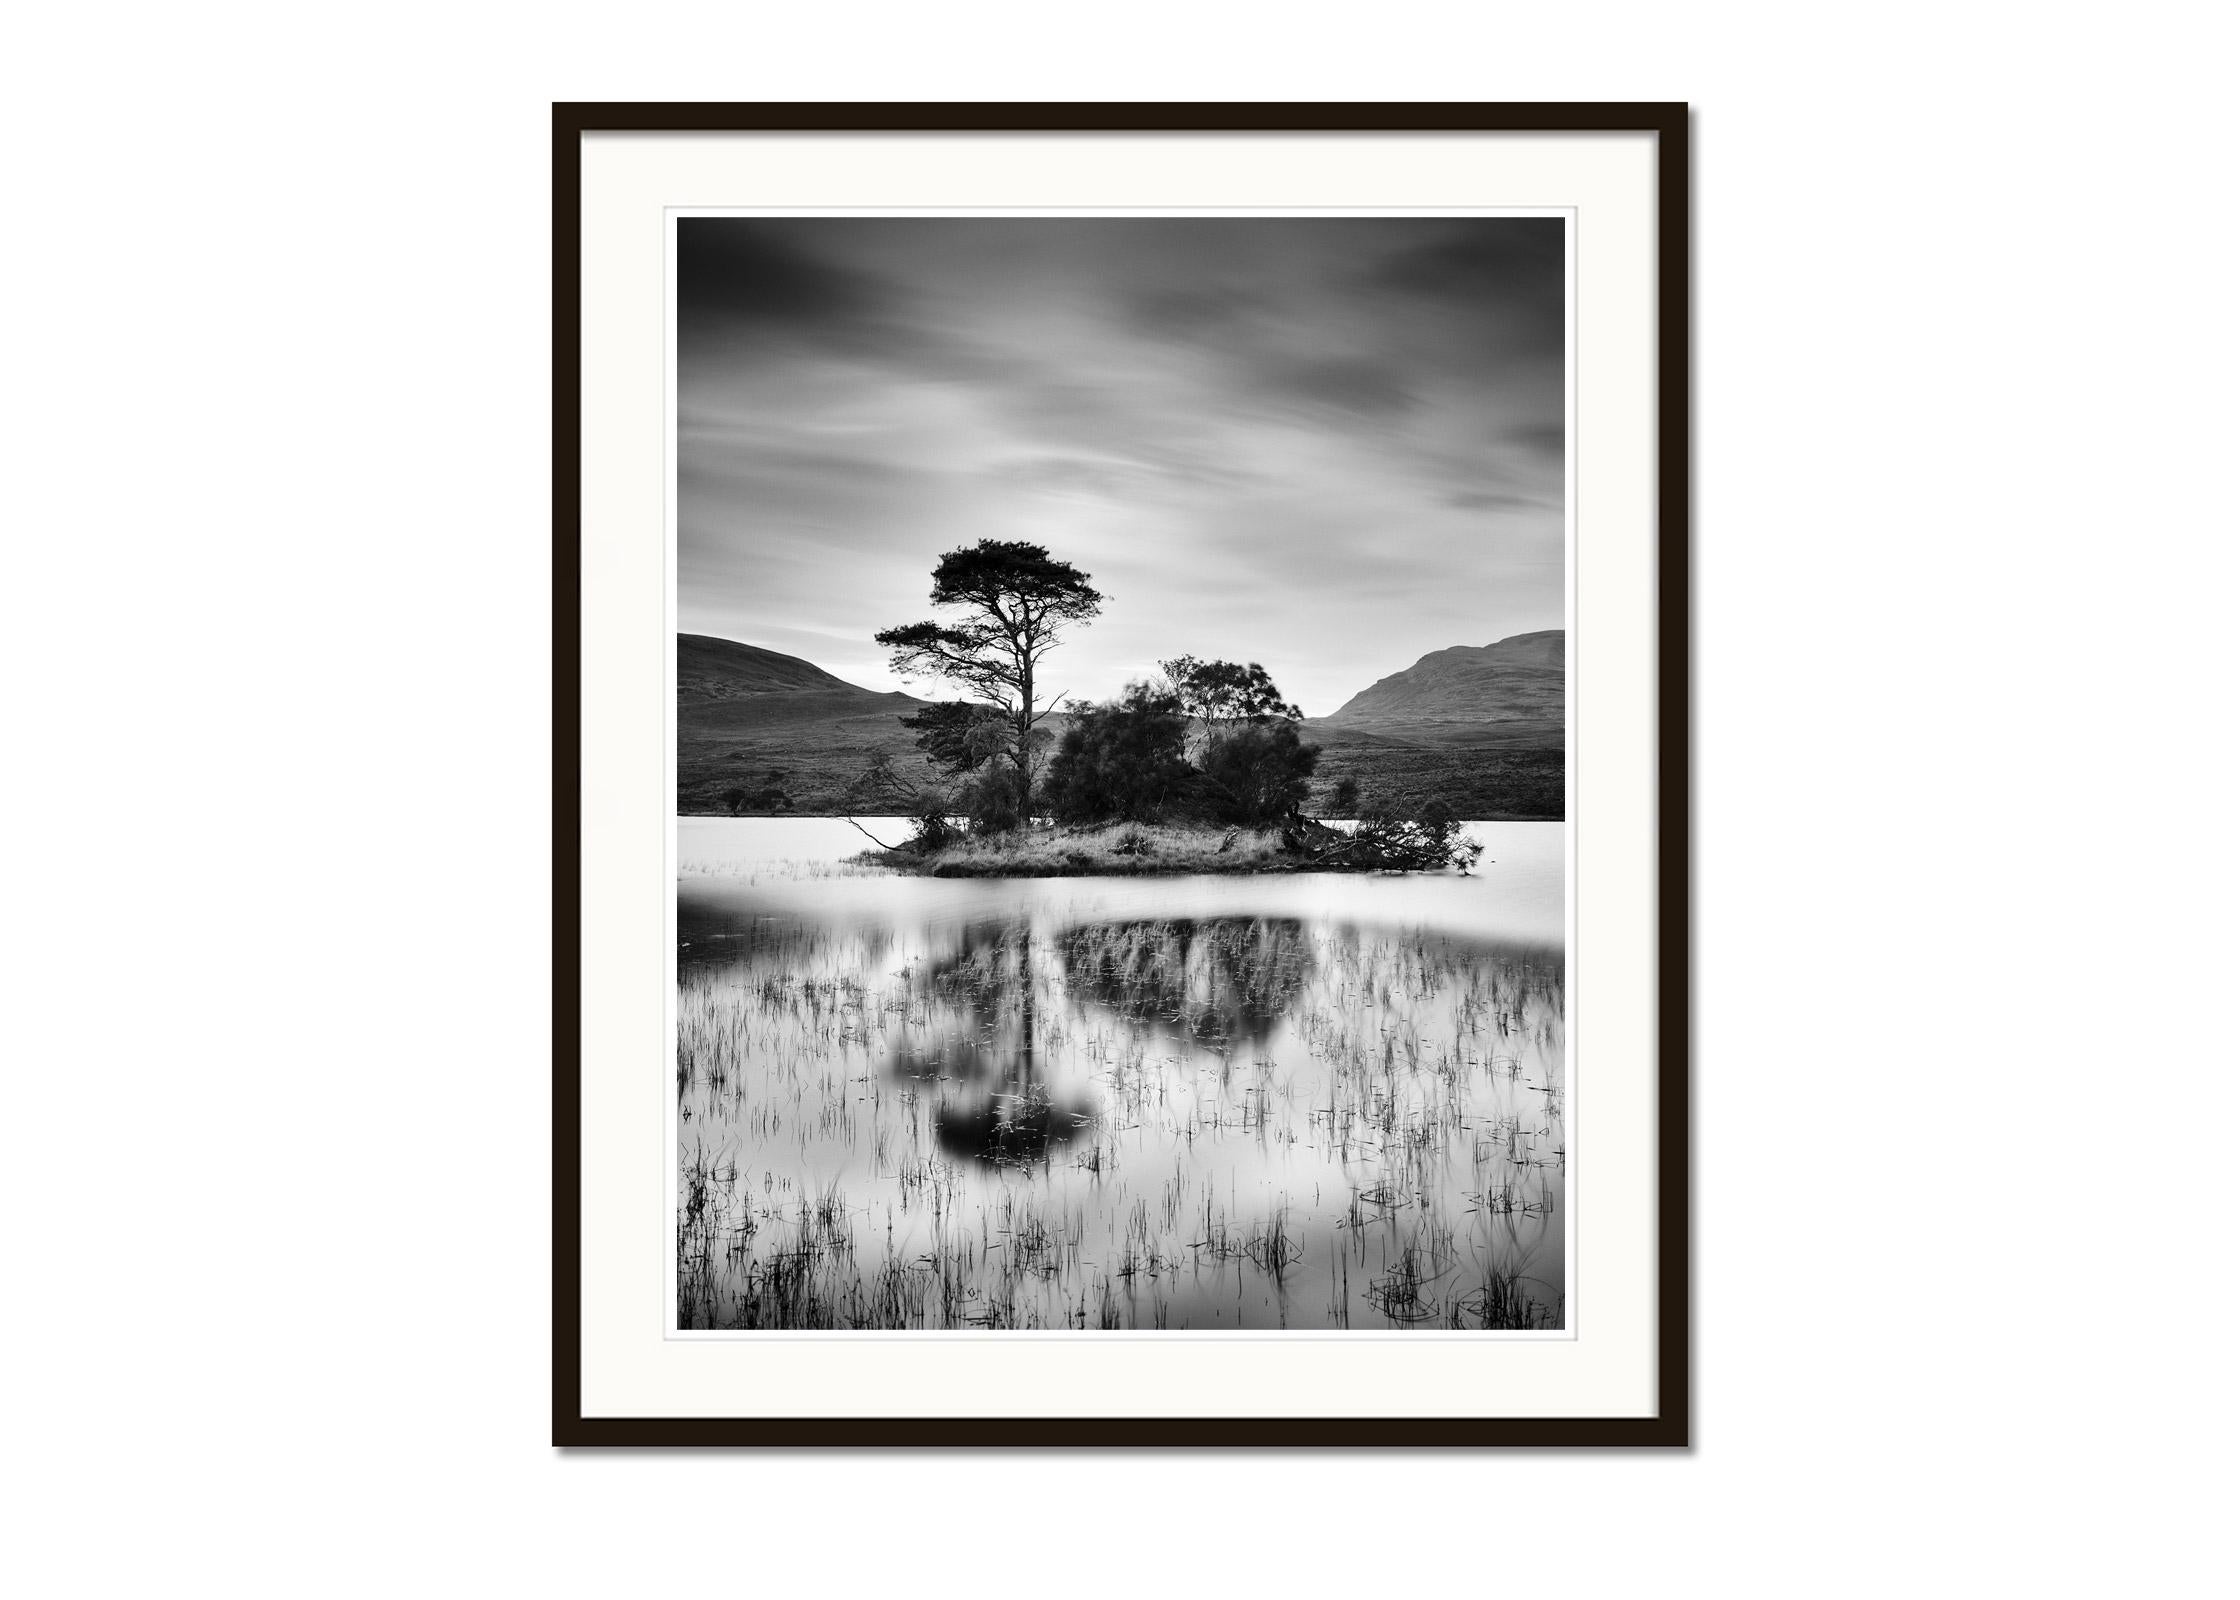 After the Sunset, Tree, Island, Scotland, black and white landscape photography - Gray Black and White Photograph by Gerald Berghammer